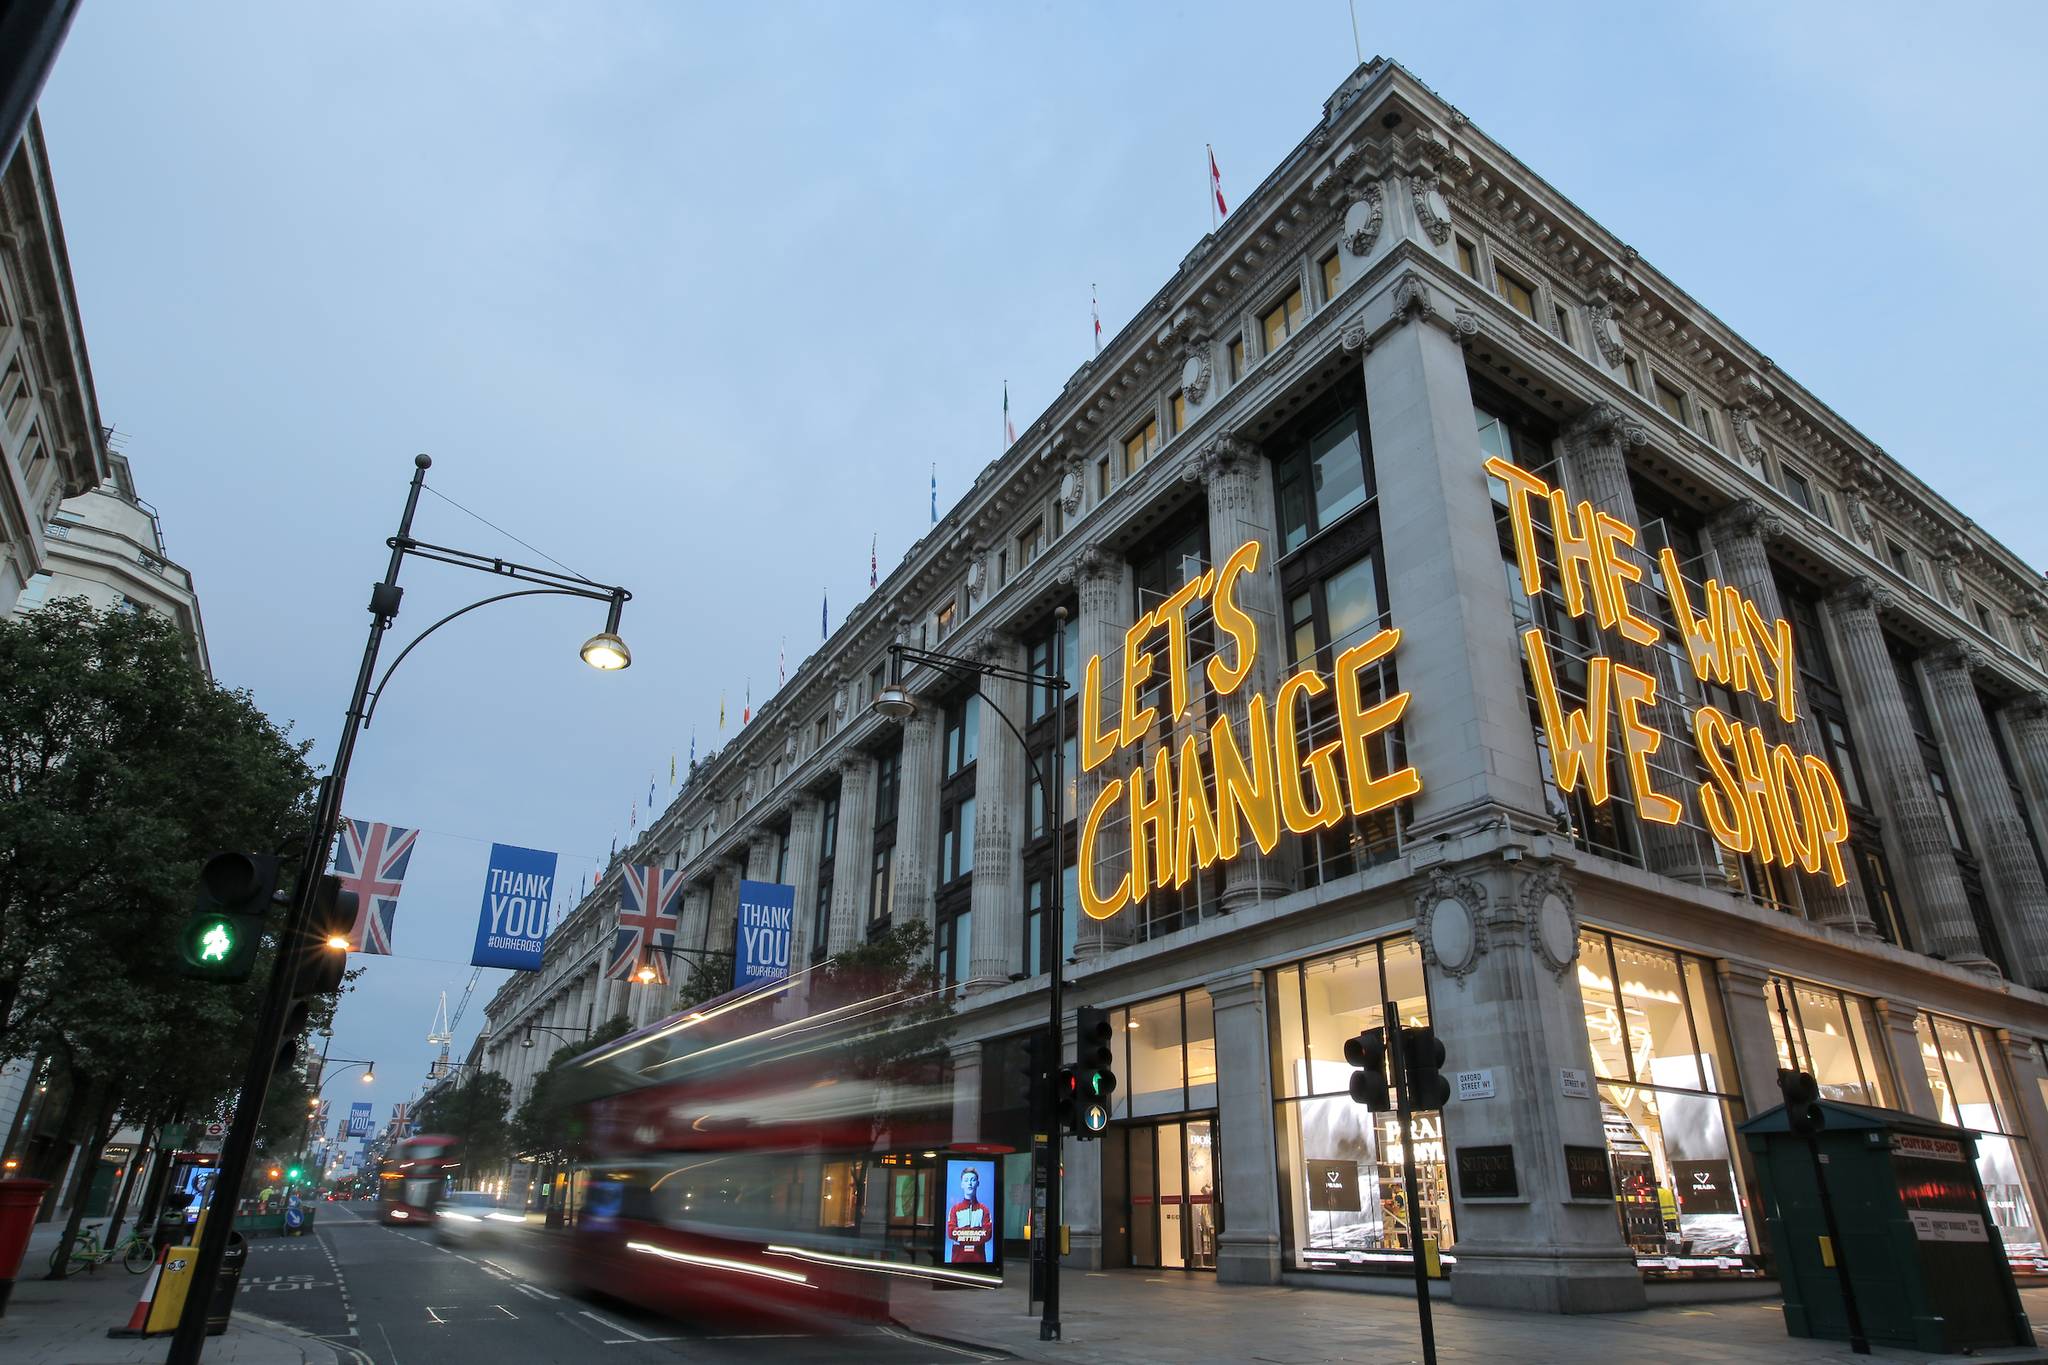 Selfridges wants half of sales to be sustainable by 2030